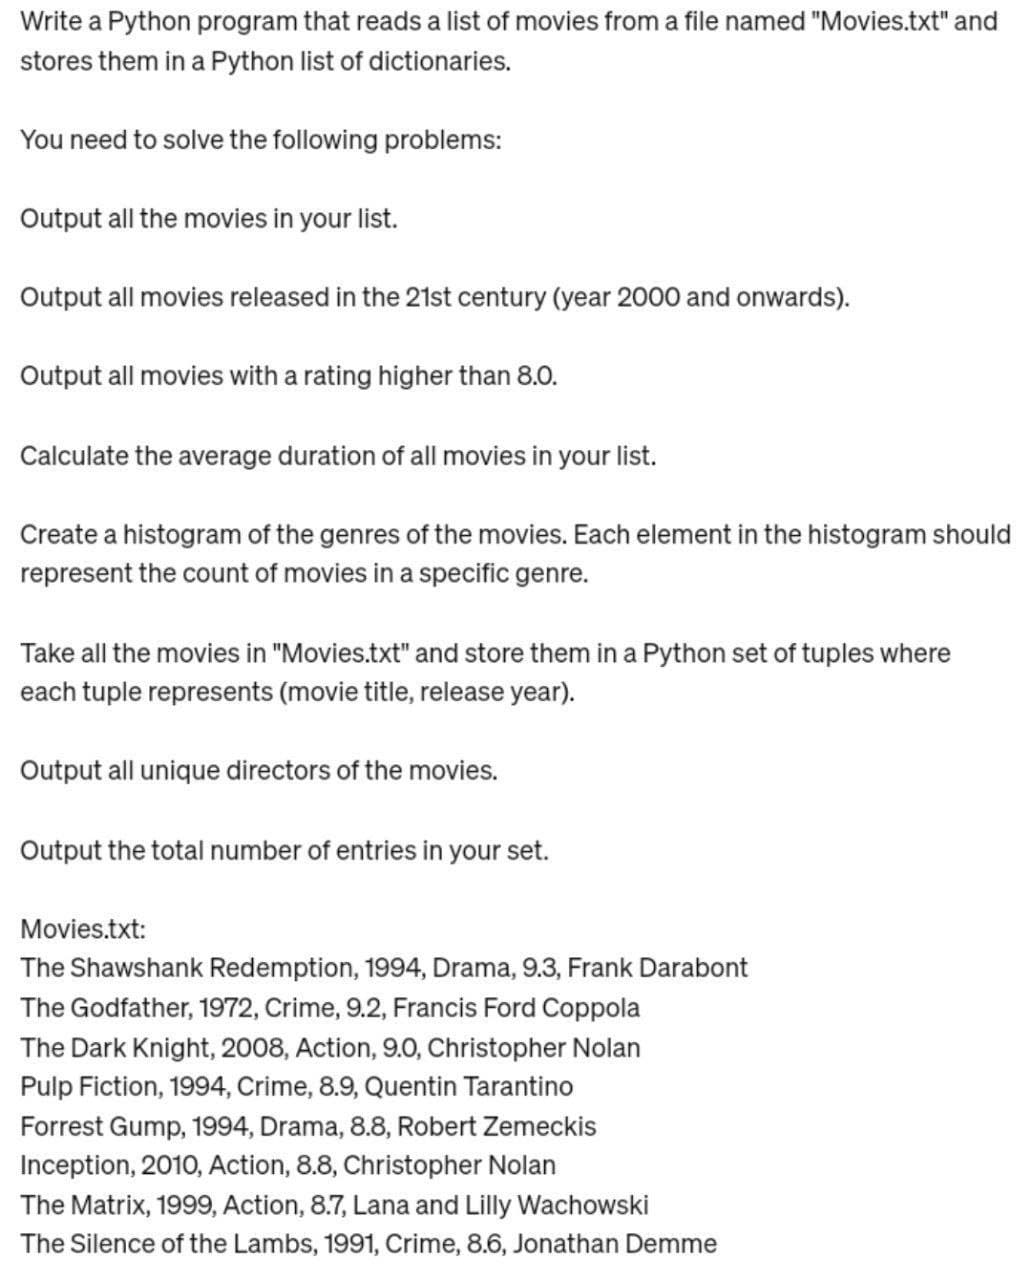 Write a Python program that reads a list of movies from a file named "Movies.txt" and
stores them in a Python list of dictionaries.
You need to solve the following problems:
Output all the movies in your list.
Output all movies released in the 21st century (year 2000 and onwards).
Output all movies with a rating higher than 8.0.
Calculate the average duration of all movies in your list.
Create a histogram of the genres of the movies. Each element in the histogram should
represent the count of movies in a specific genre.
Take all the movies in "Movies.txt" and store them in a Python set of tuples where
each tuple represents (movie title, release year).
Output all unique directors of the movies.
Output the total number of entries in your set.
Movies.txt:
The Shawshank Redemption, 1994, Drama, 9.3, Frank Darabont
The Godfather, 1972, Crime, 9.2, Francis Ford Coppola
The Dark Knight, 2008, Action, 9.0, Christopher Nolan
Pulp Fiction, 1994, Crime, 8.9, Quentin Tarantino
Forrest Gump, 1994, Drama, 8.8, Robert Zemeckis
Inception, 2010, Action, 8.8, Christopher Nolan
The Matrix, 1999, Action, 8.7, Lana and Lilly Wachowski
The Silence of the Lambs, 1991, Crime, 8.6, Jonathan Demme